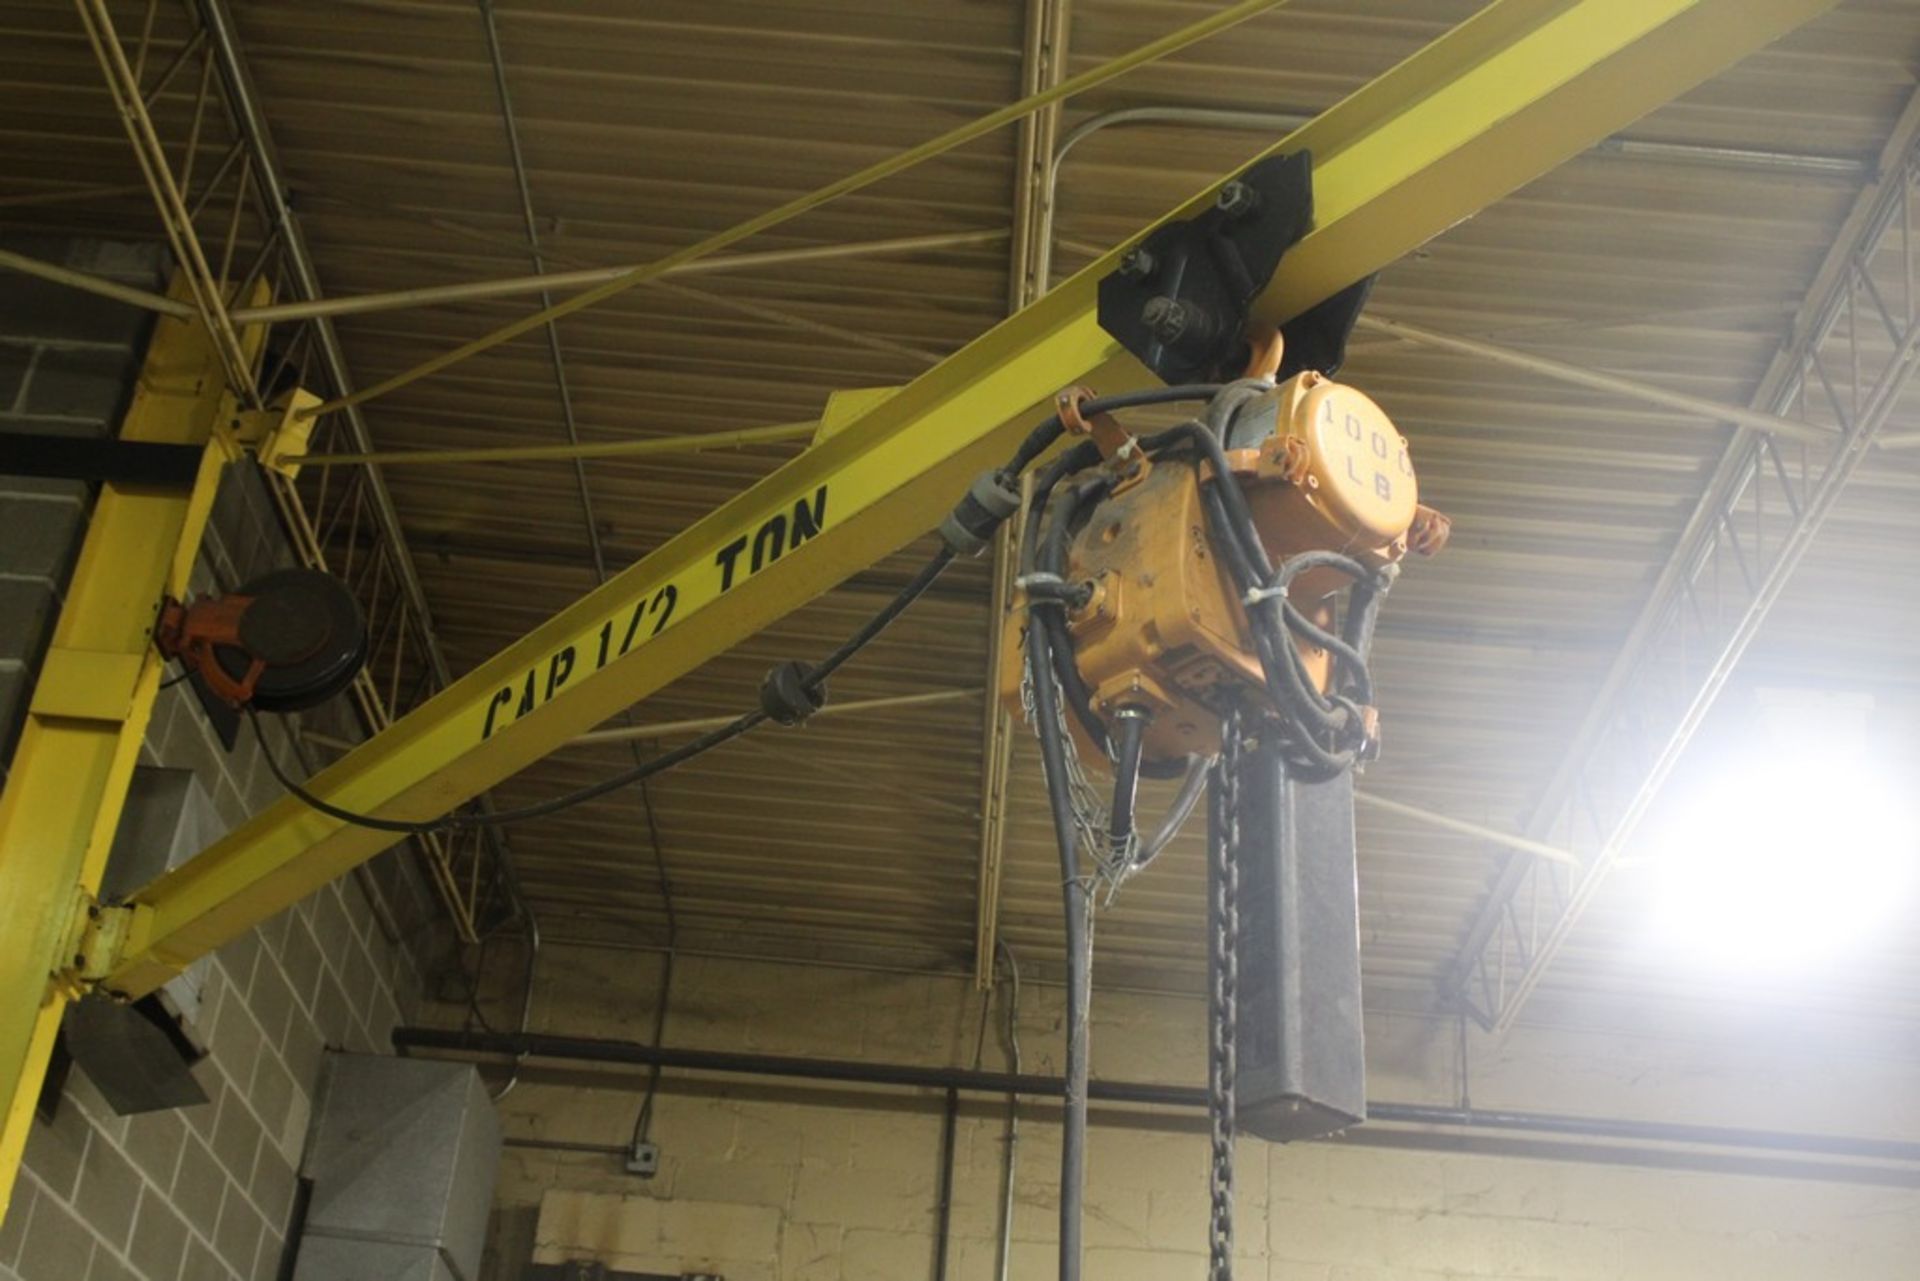 12' 1/2 TON JIB CRANE WITH INGERSOLL RAND 1/2 TON ELECTRIC HOIST WITH PENDANT - Image 2 of 5